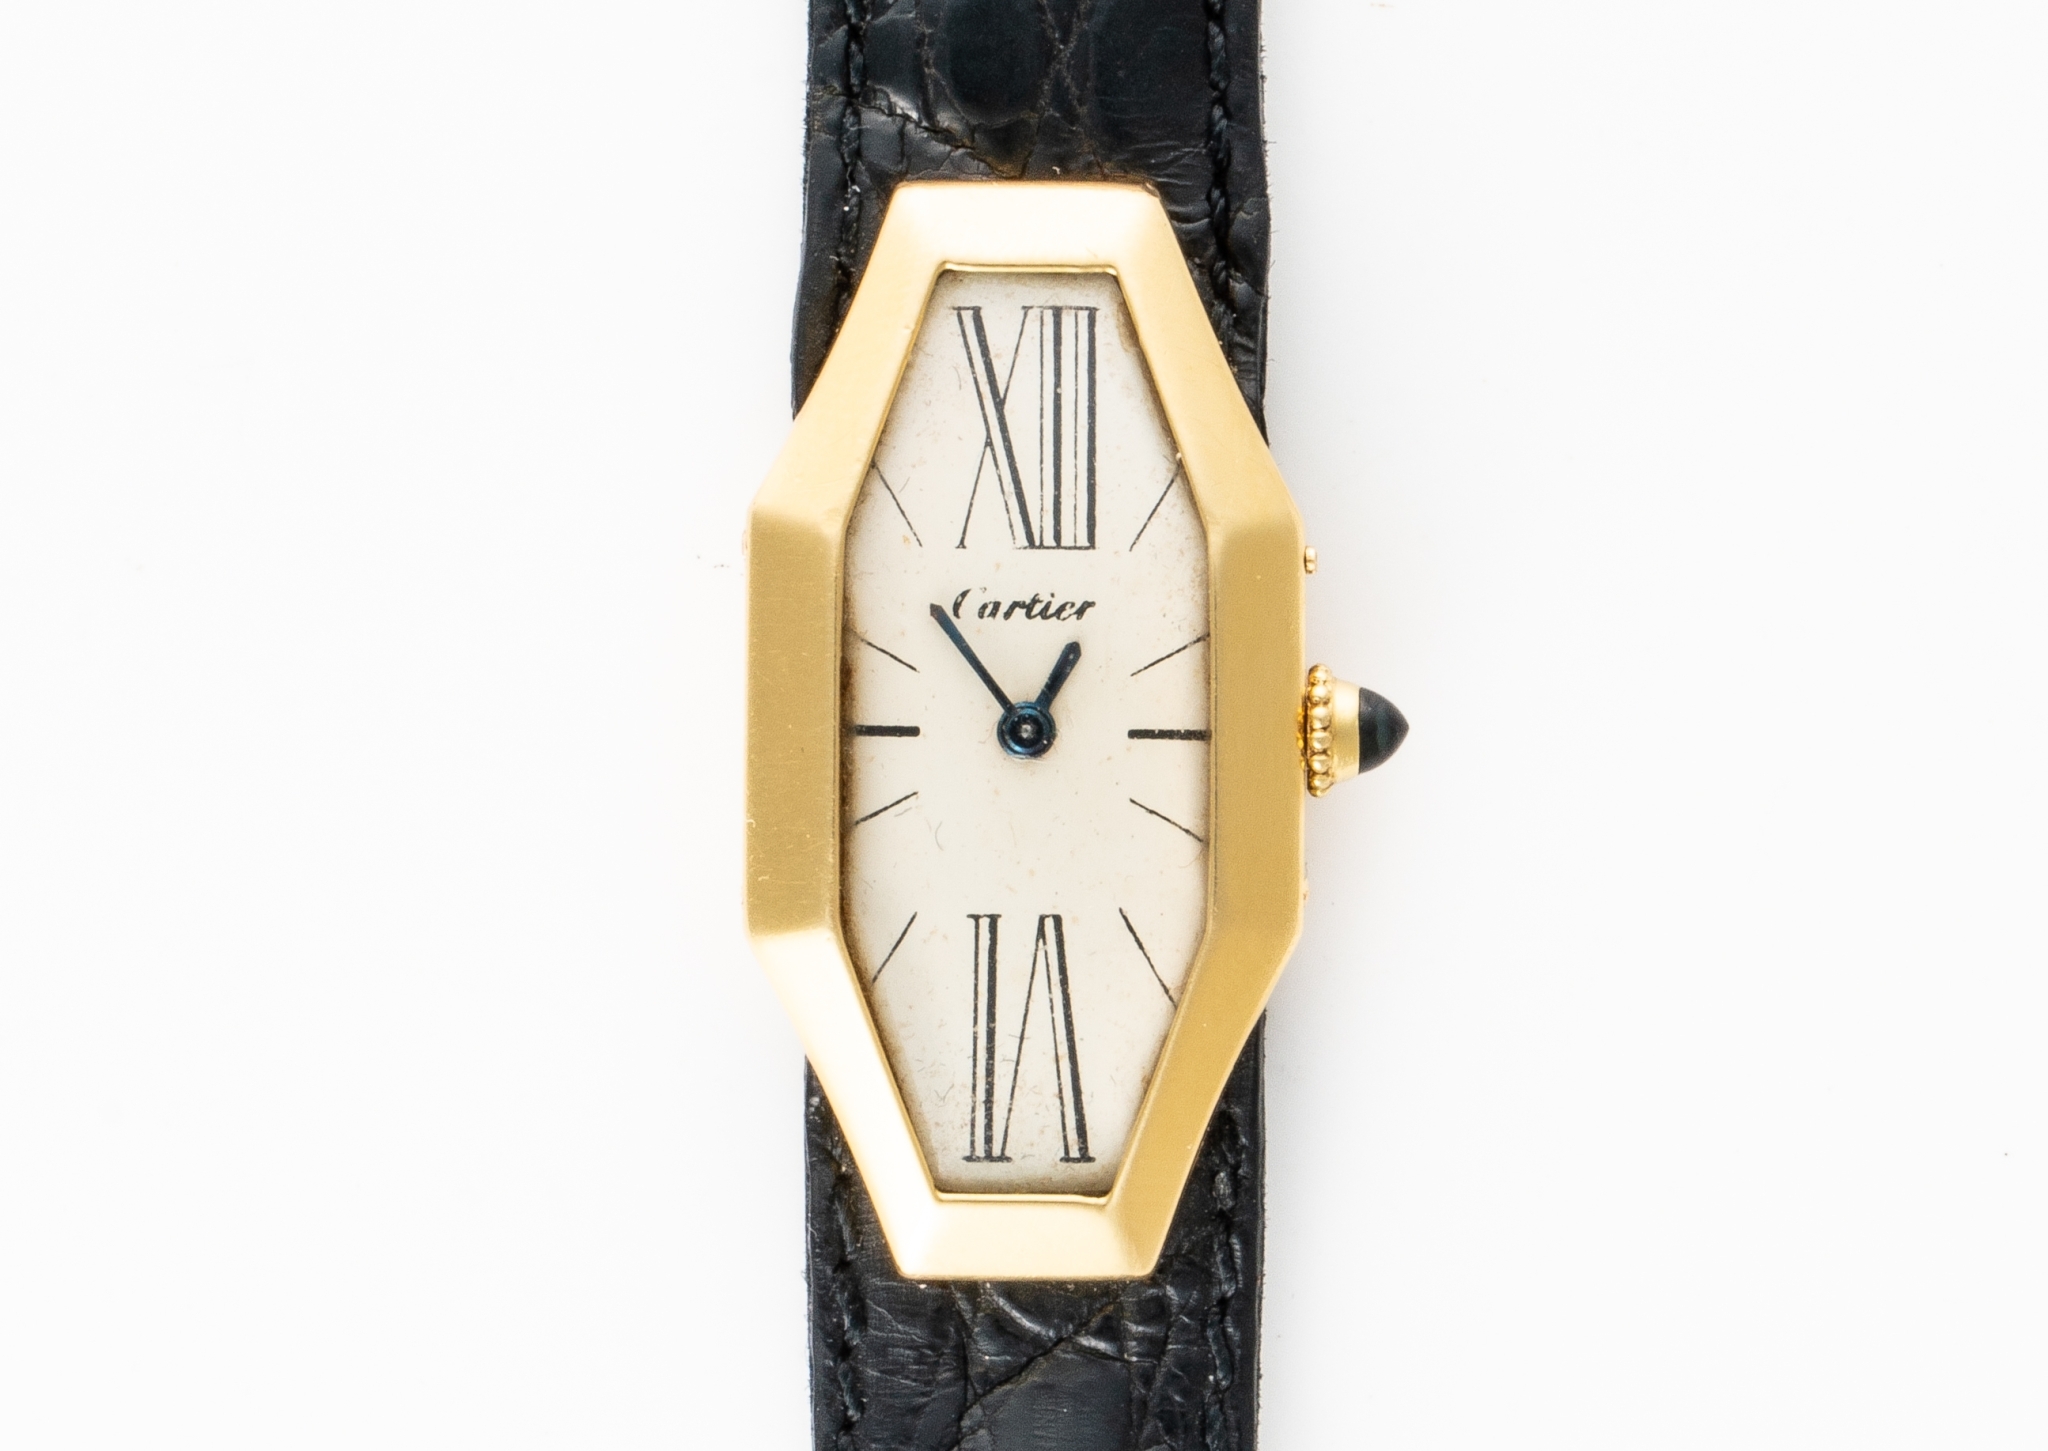 An extremely rare gentleman's size 18ct gold Cartier "Losange" manual wind wristwatch £50,000-70,000